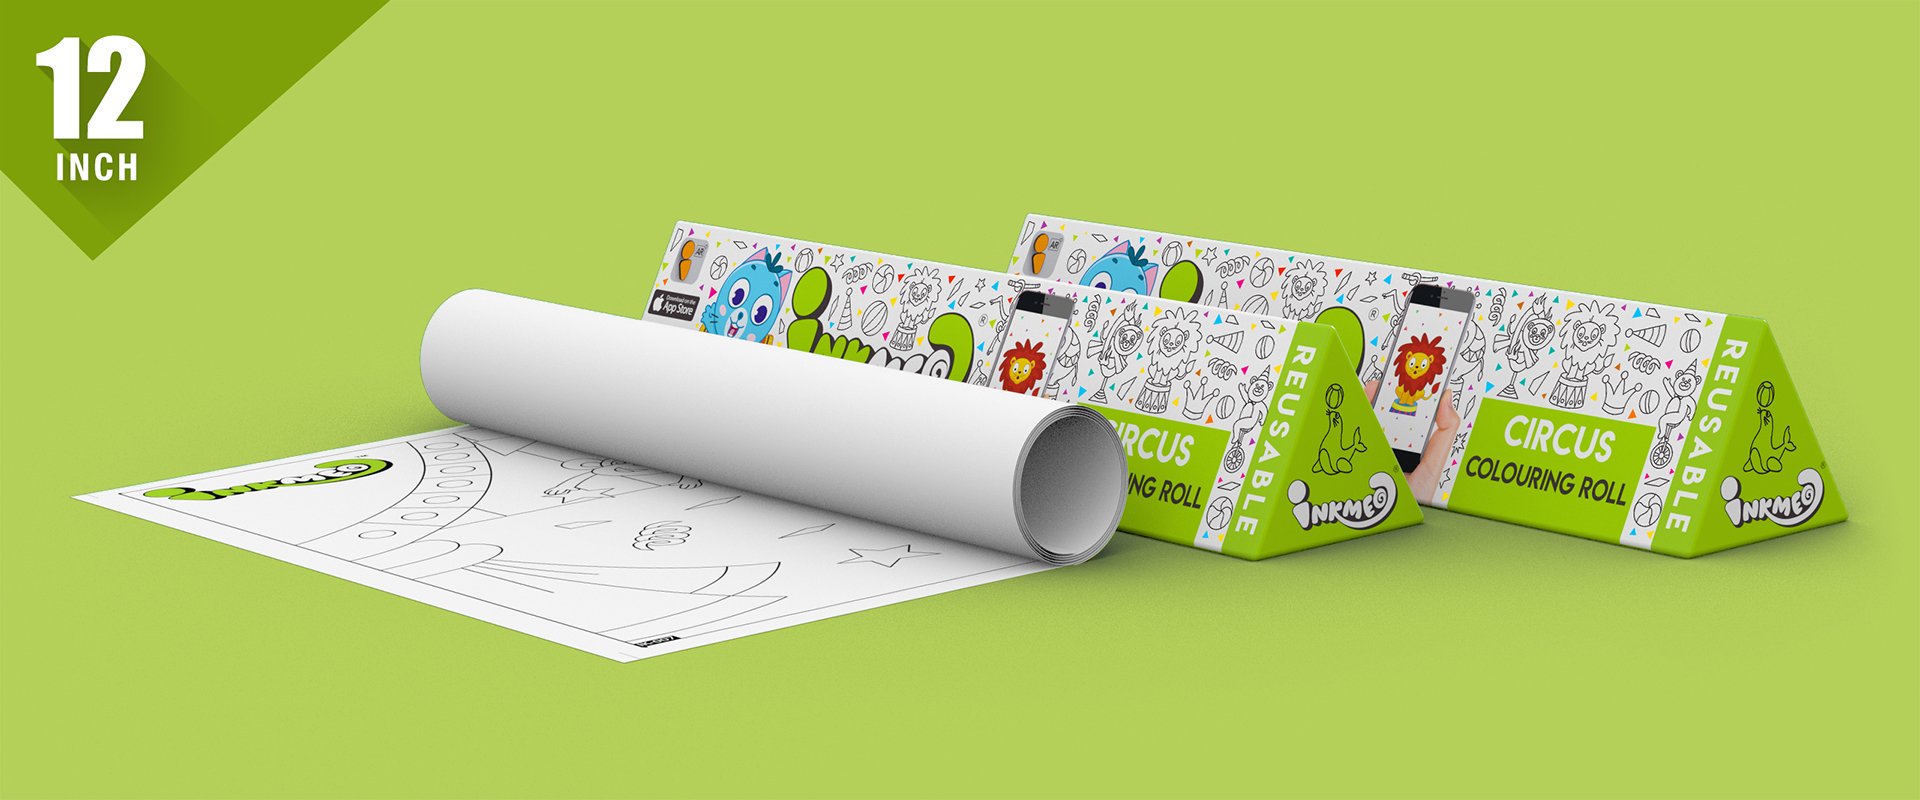 Circus Colouring Roll (12 inch) - Inkmeo